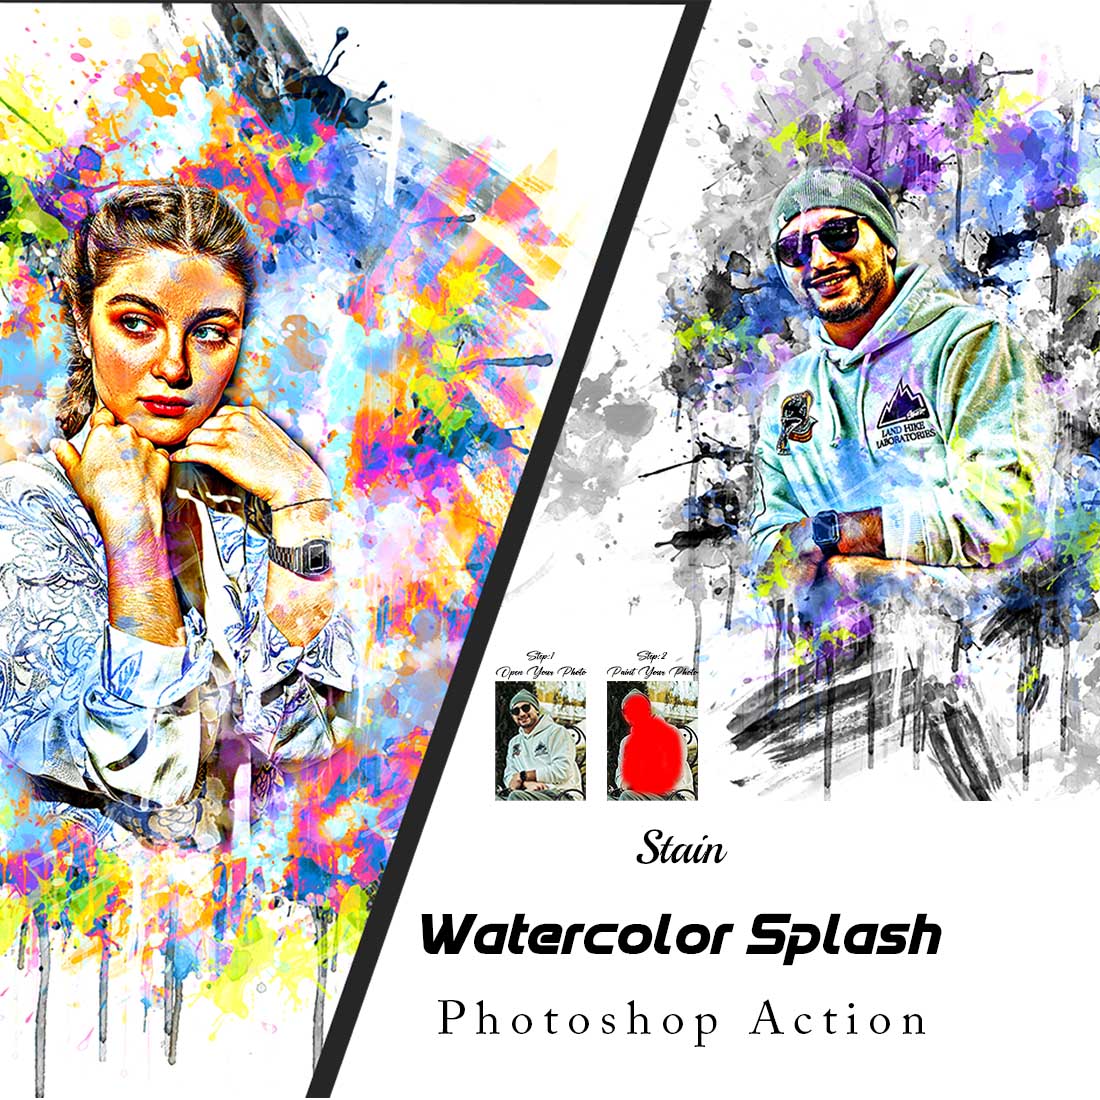 Stain Watercolor Splash Photoshop Action cover image.